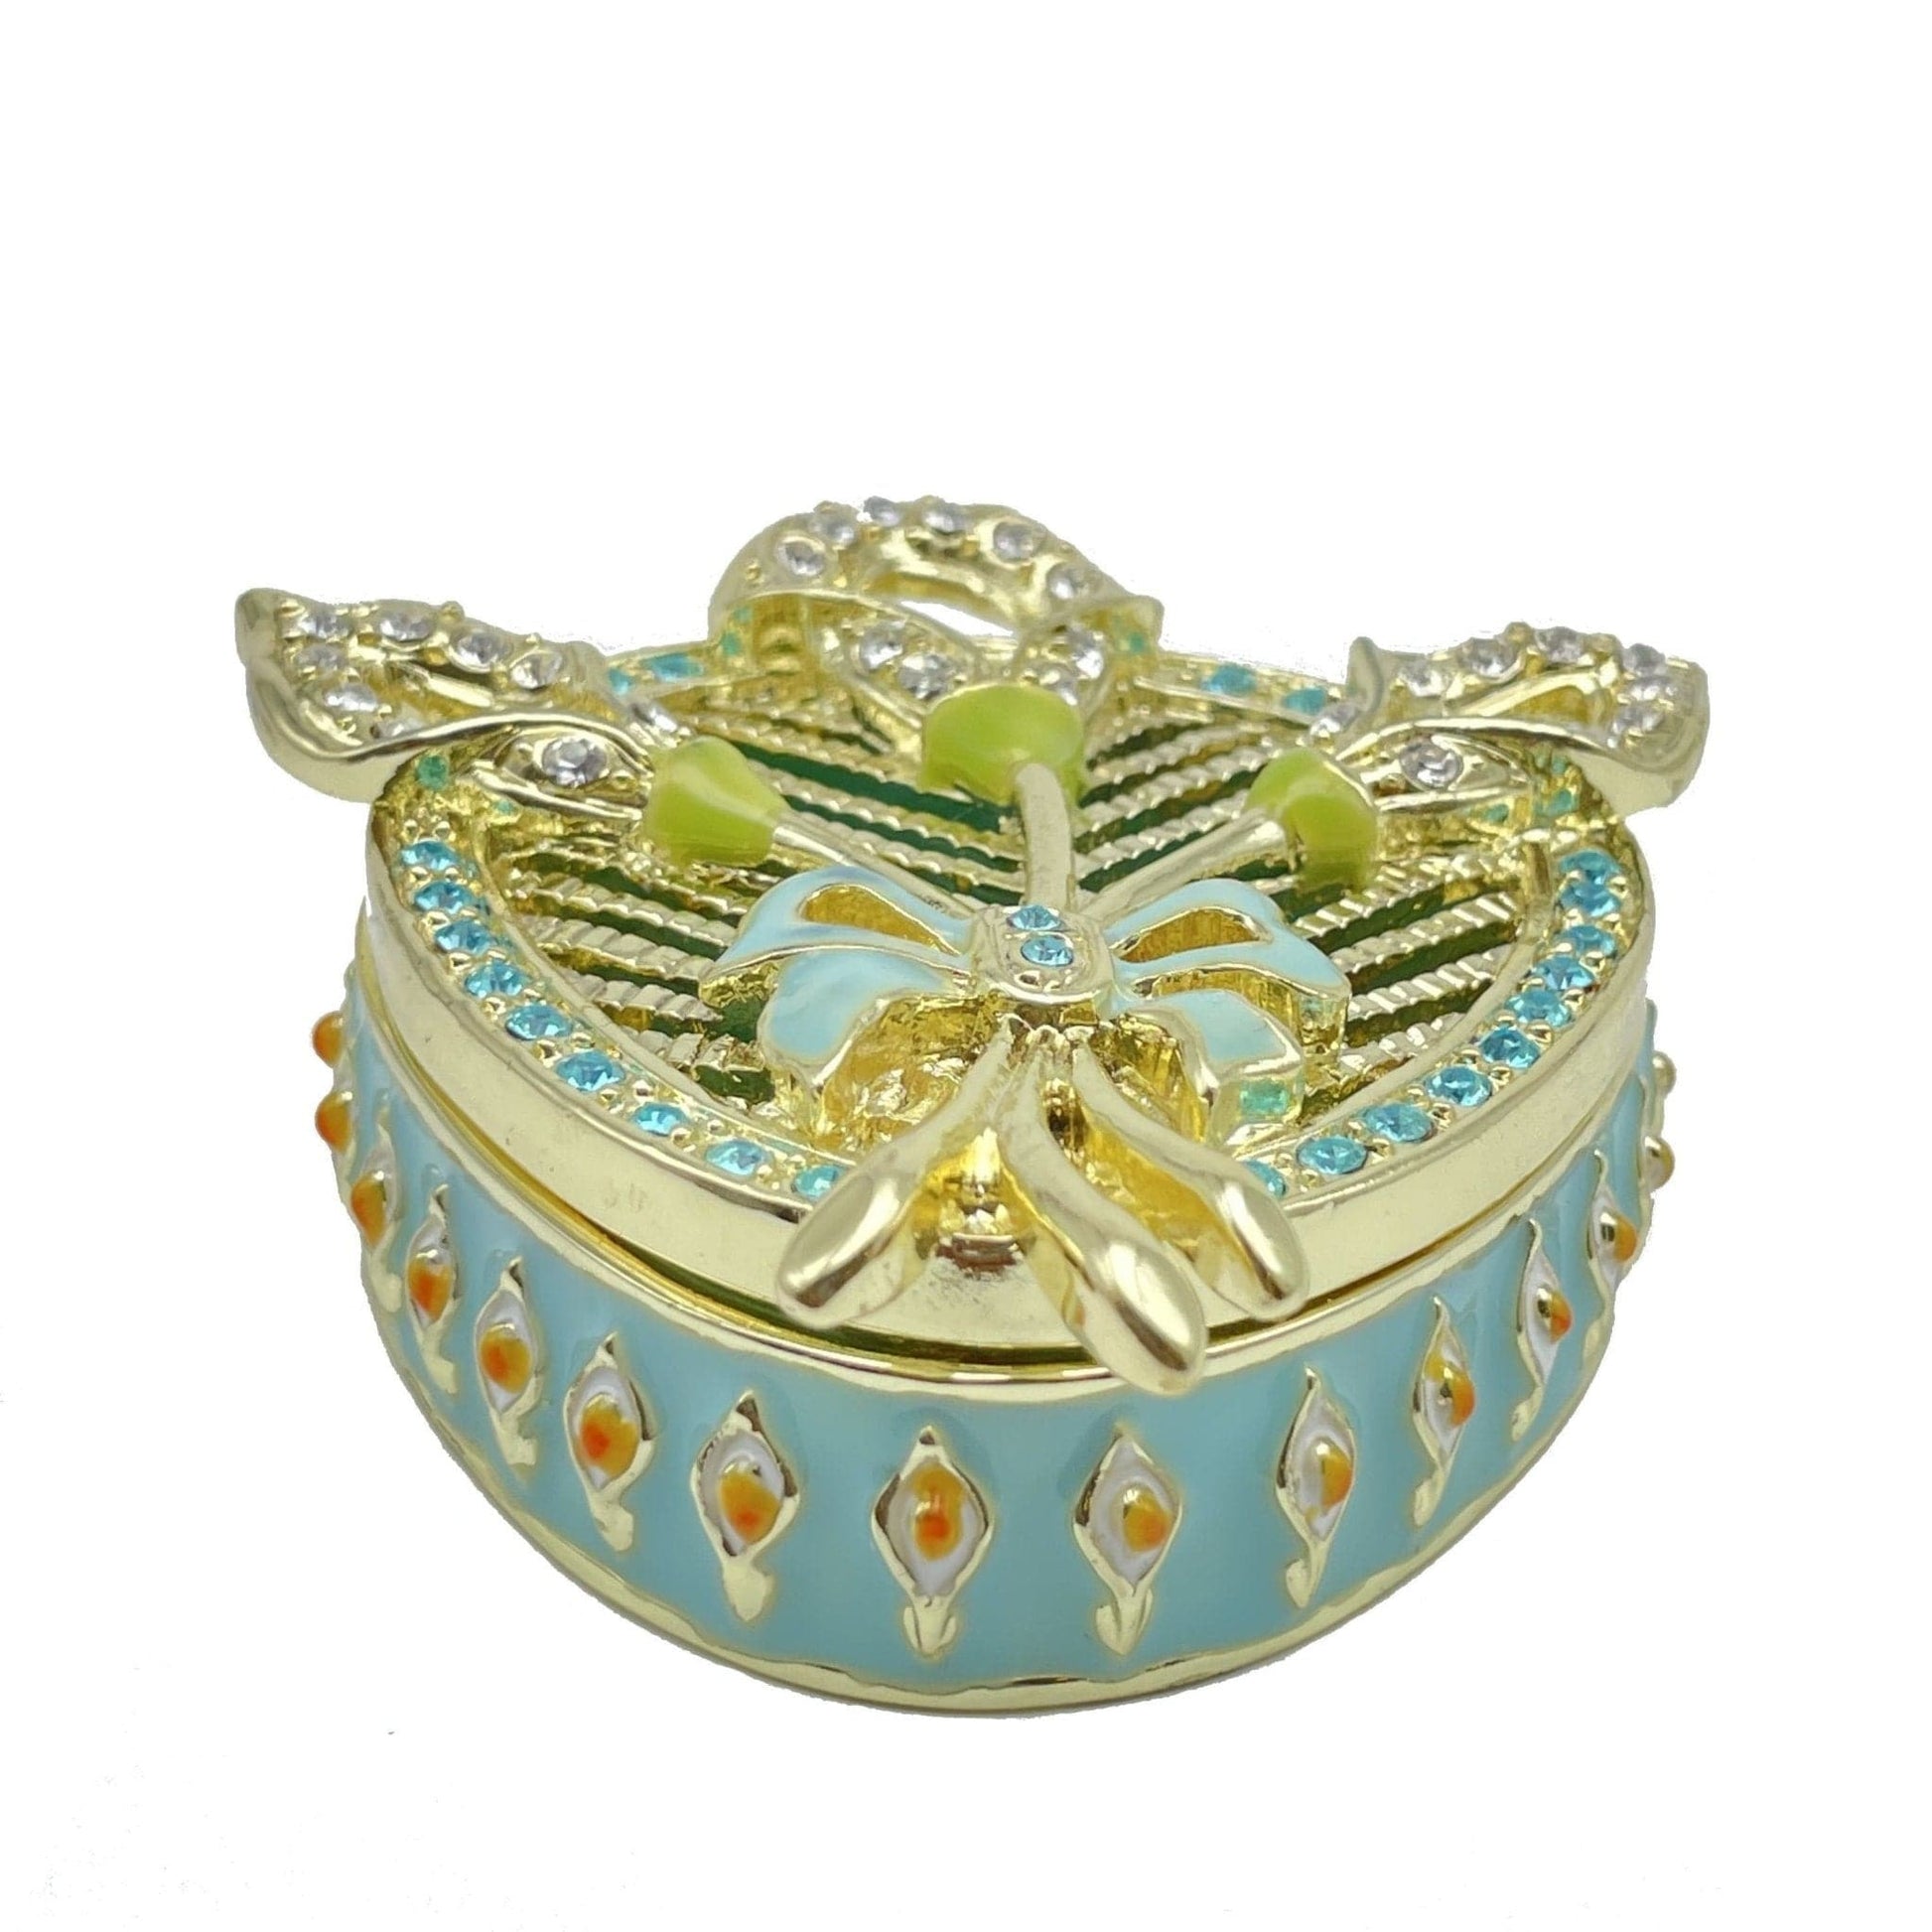 Green turquoise Beautiful Decorated Trinket Box | Treasures of my HeART